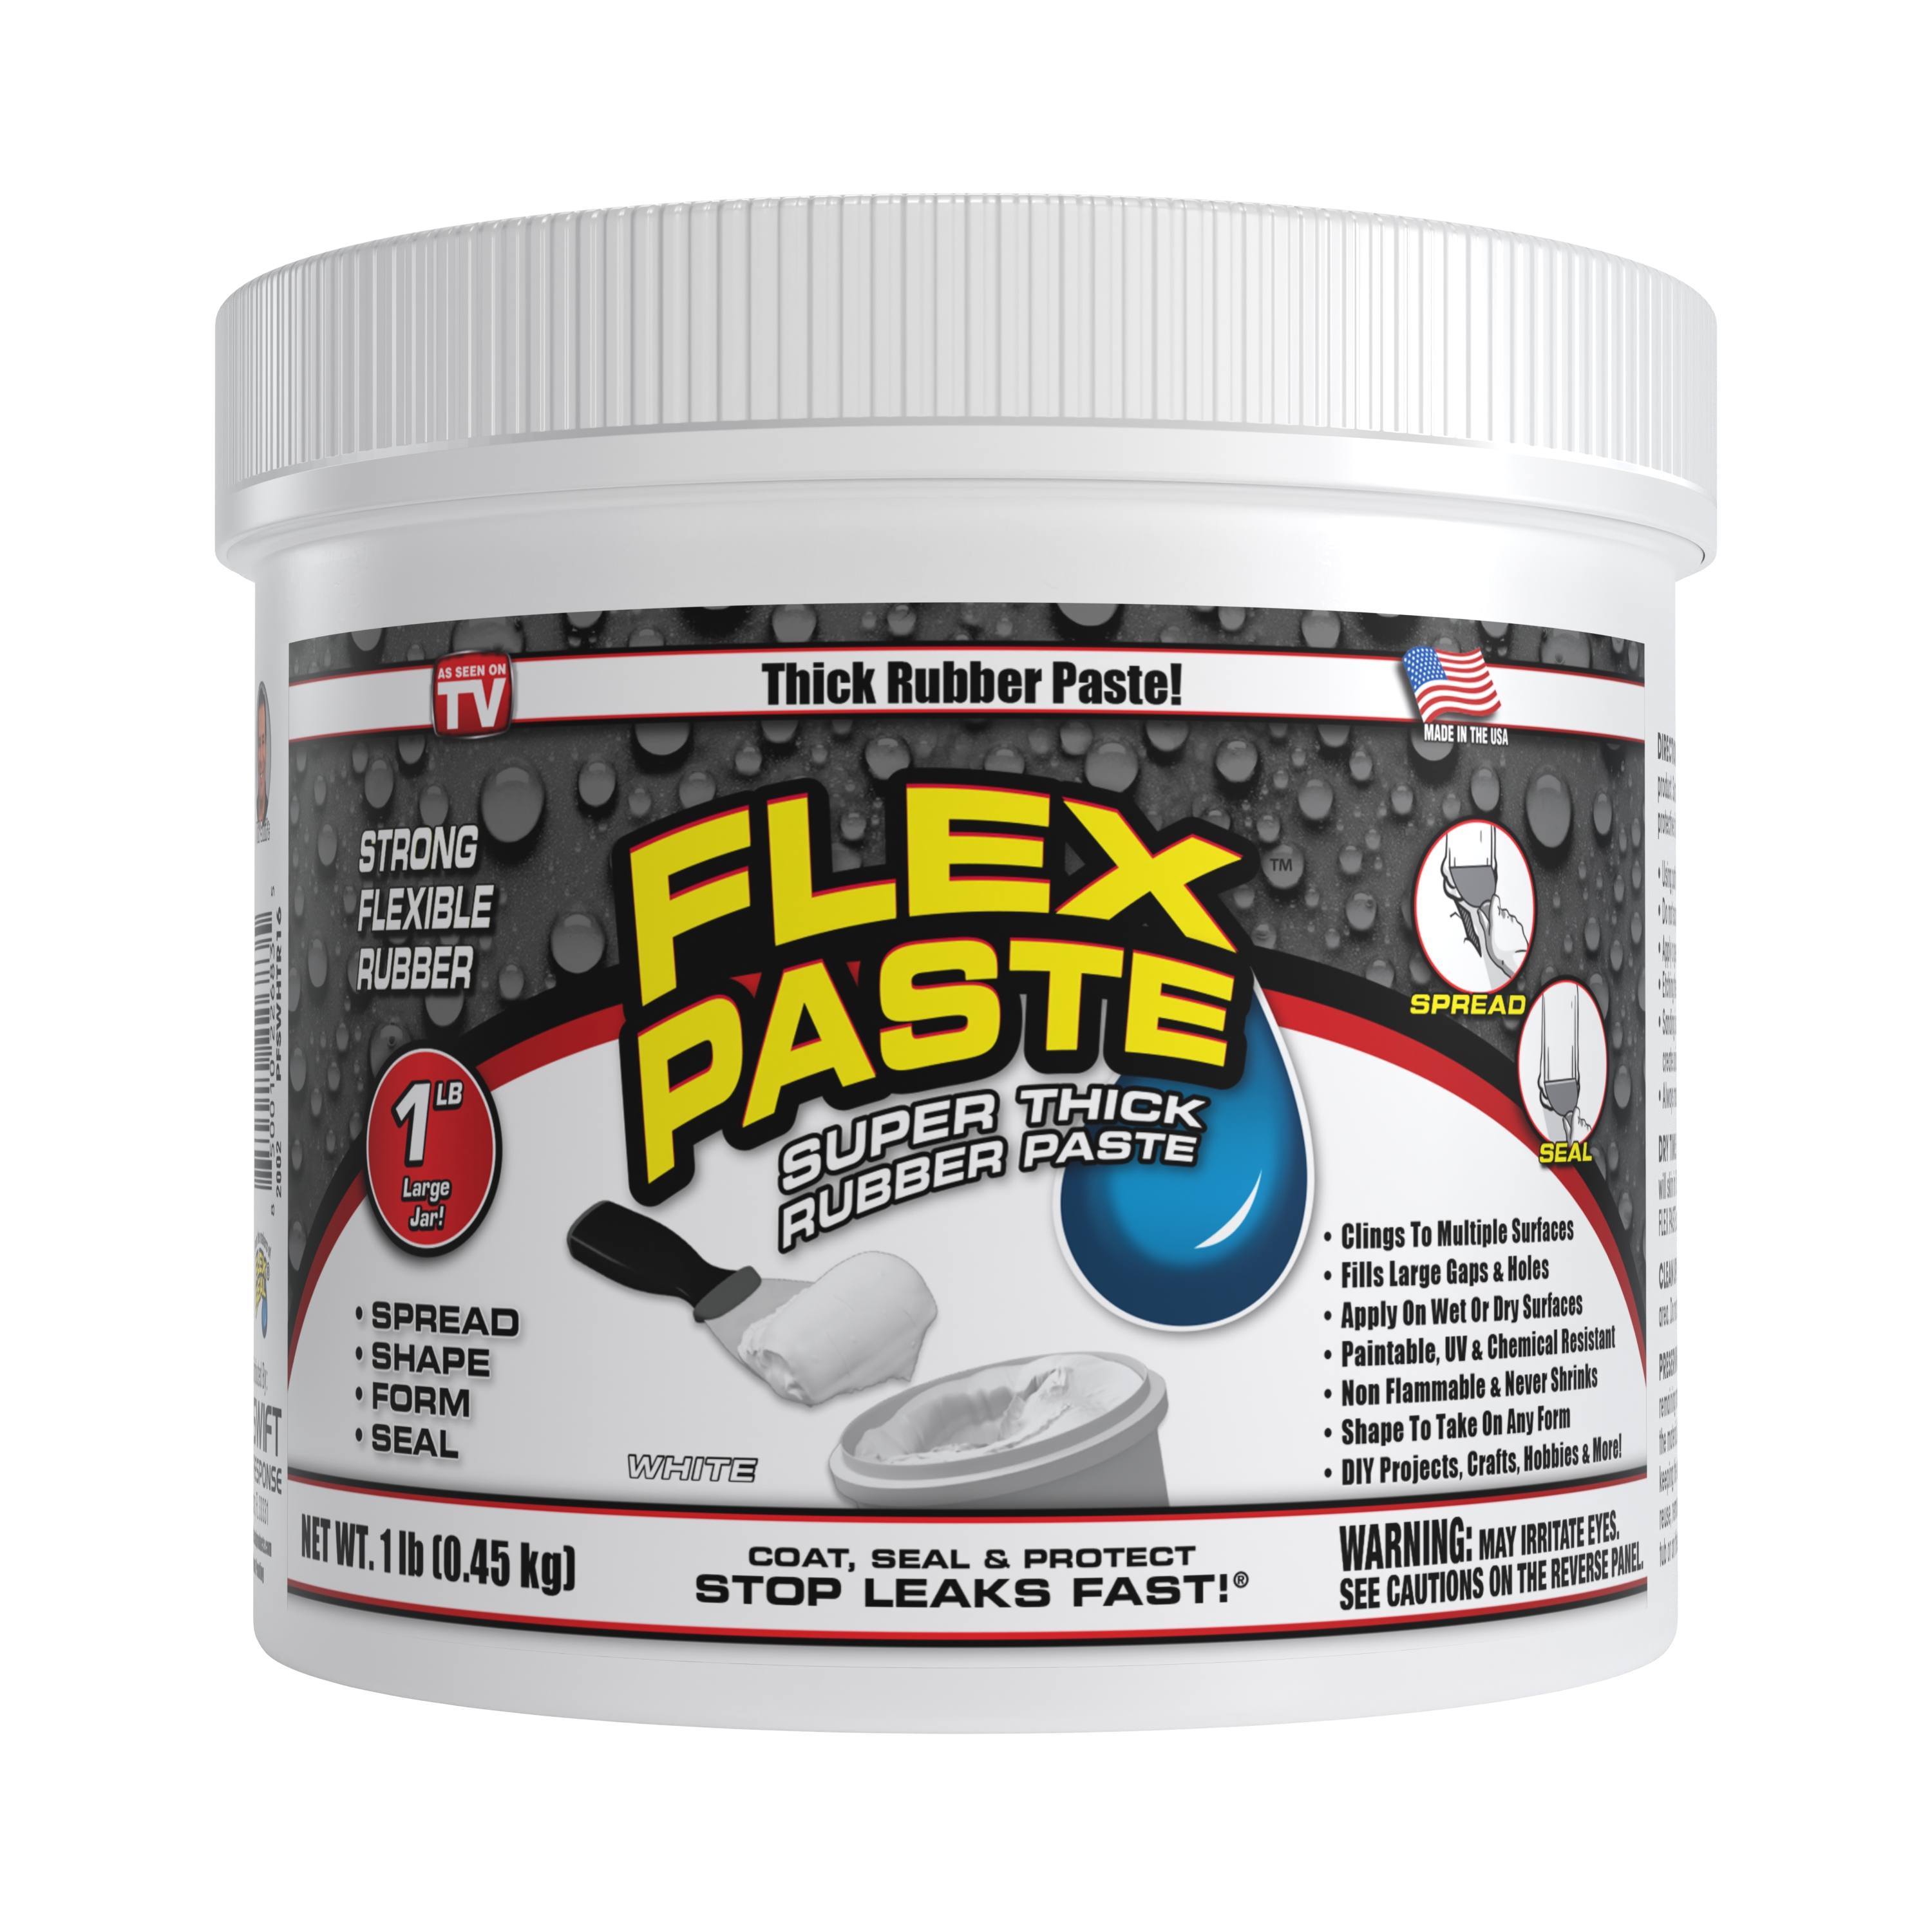 Flex Paste As Seen on TV Super Thick Rubber Spreadable Paste, White 1lb Tub - image 1 of 10